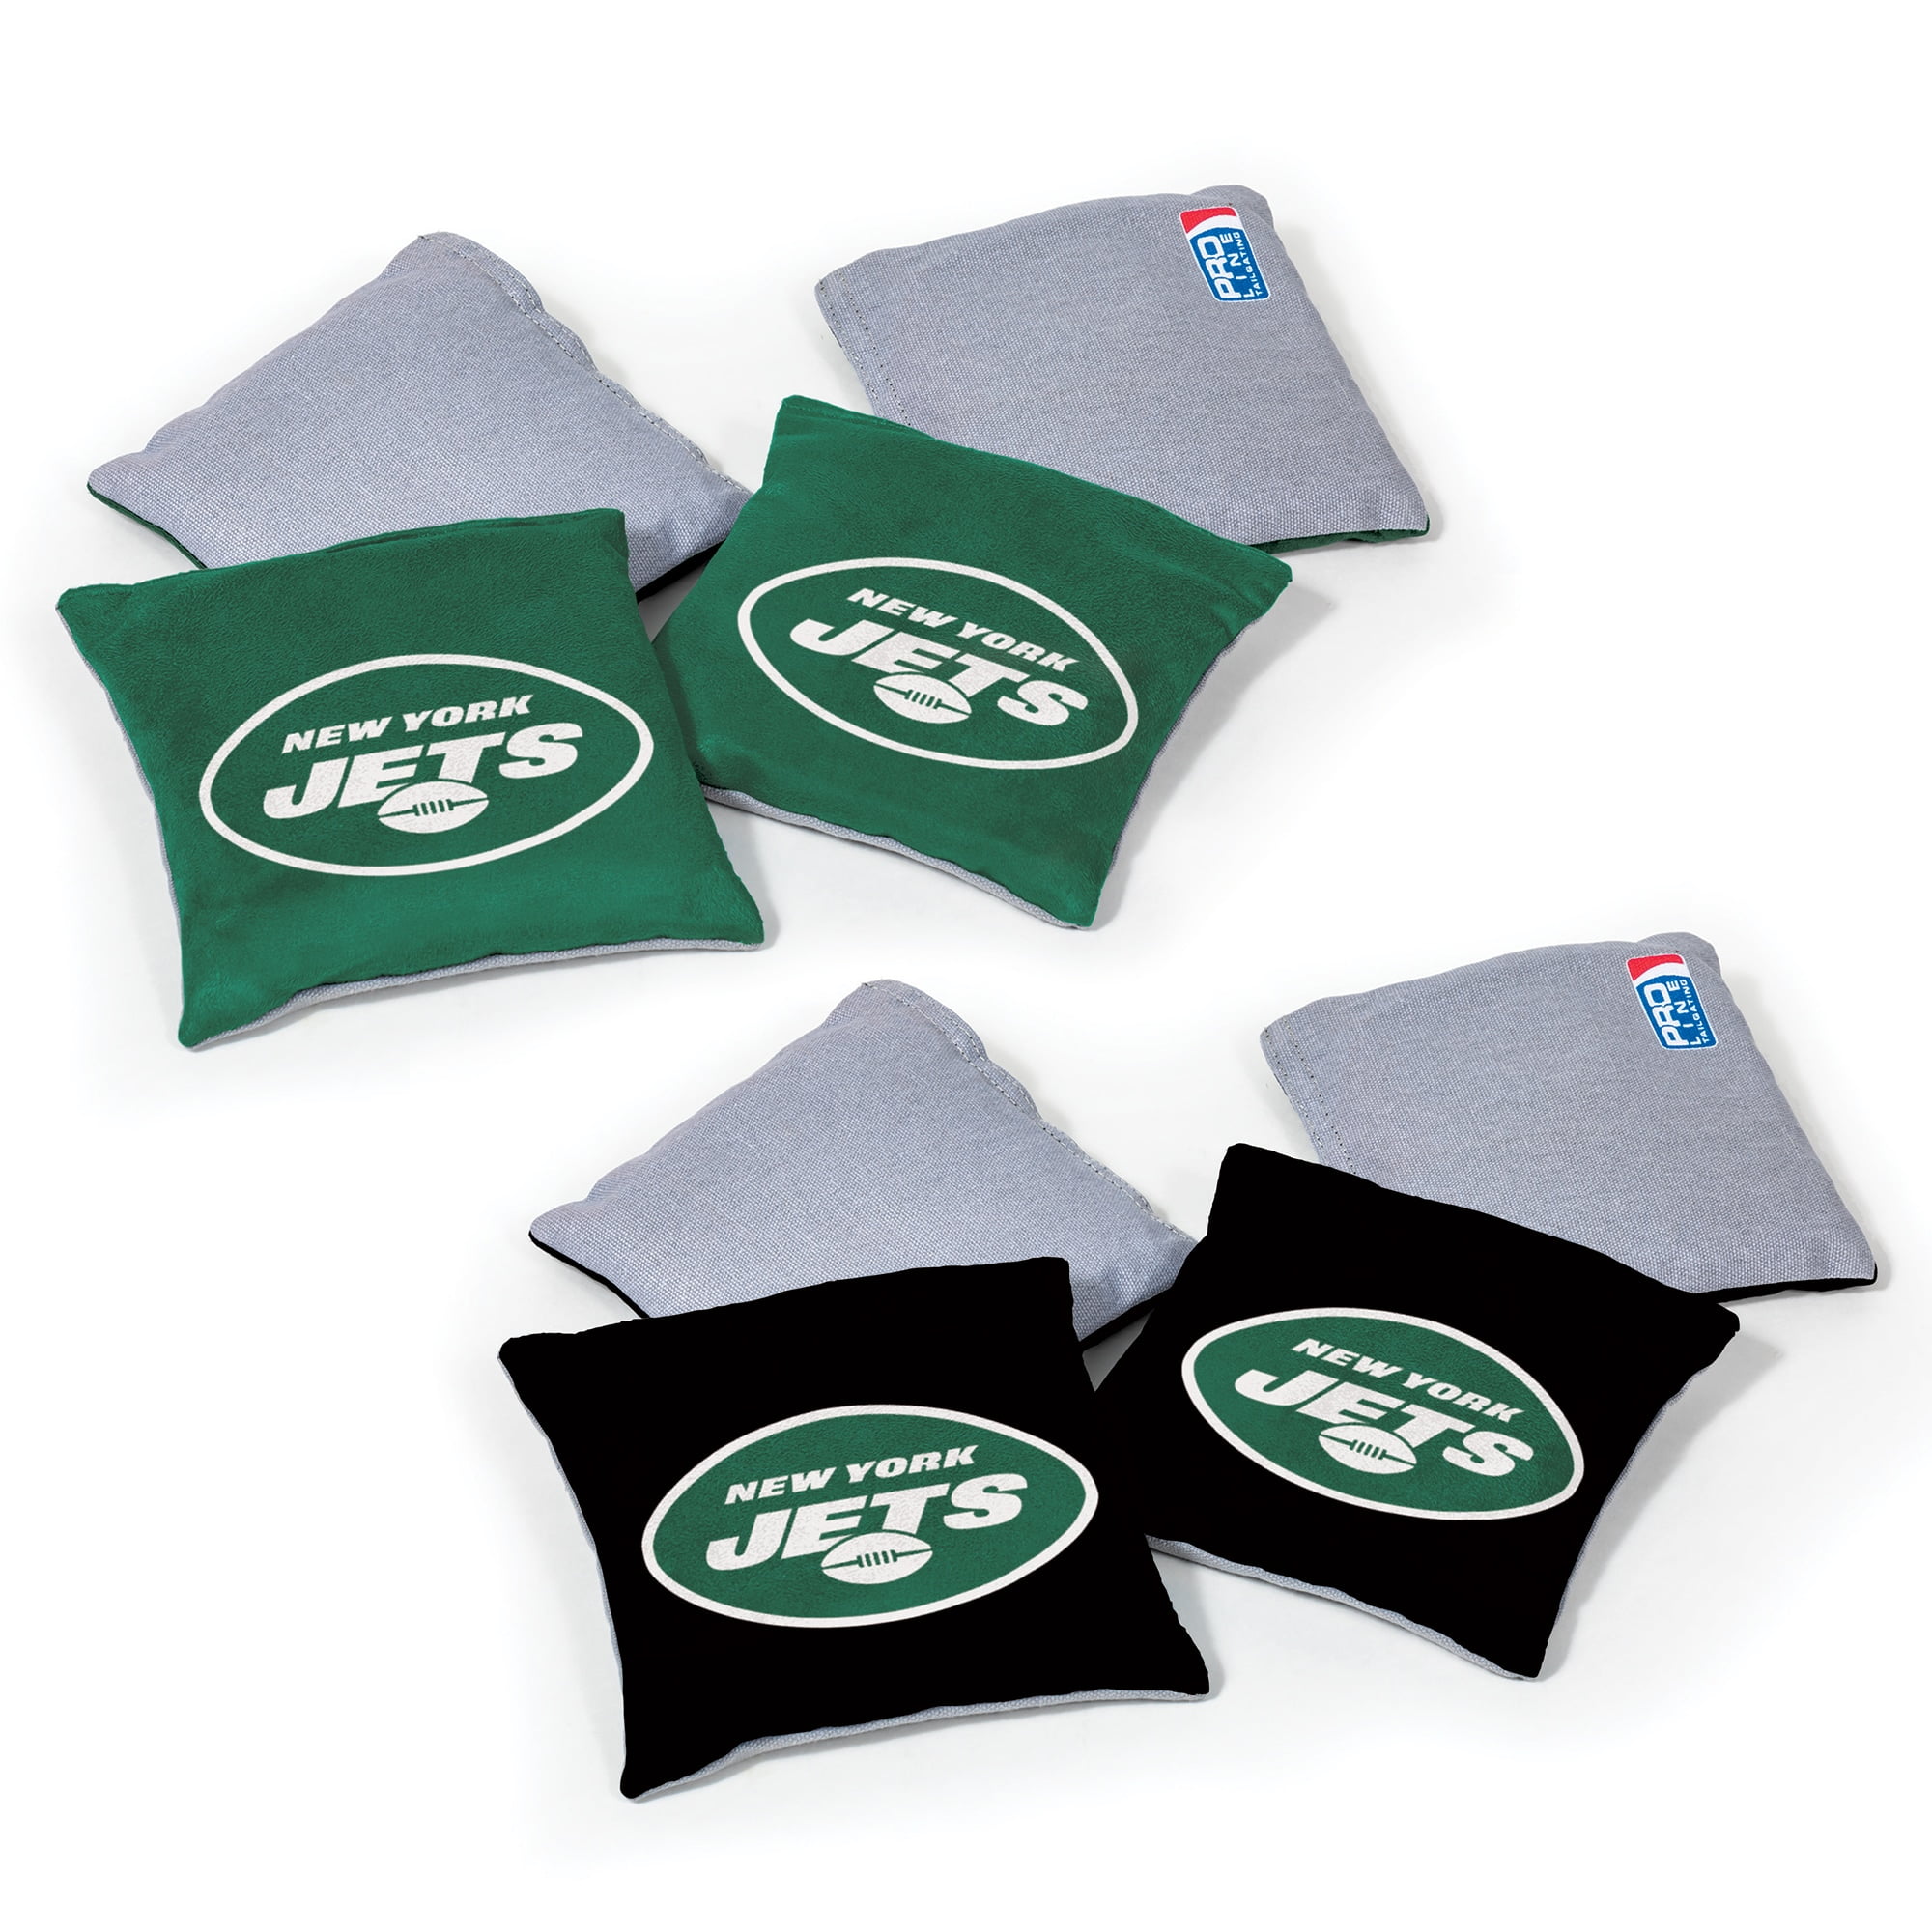 Full Set New York Jets Corn Hole Bag Toss High Quality Decals HD 